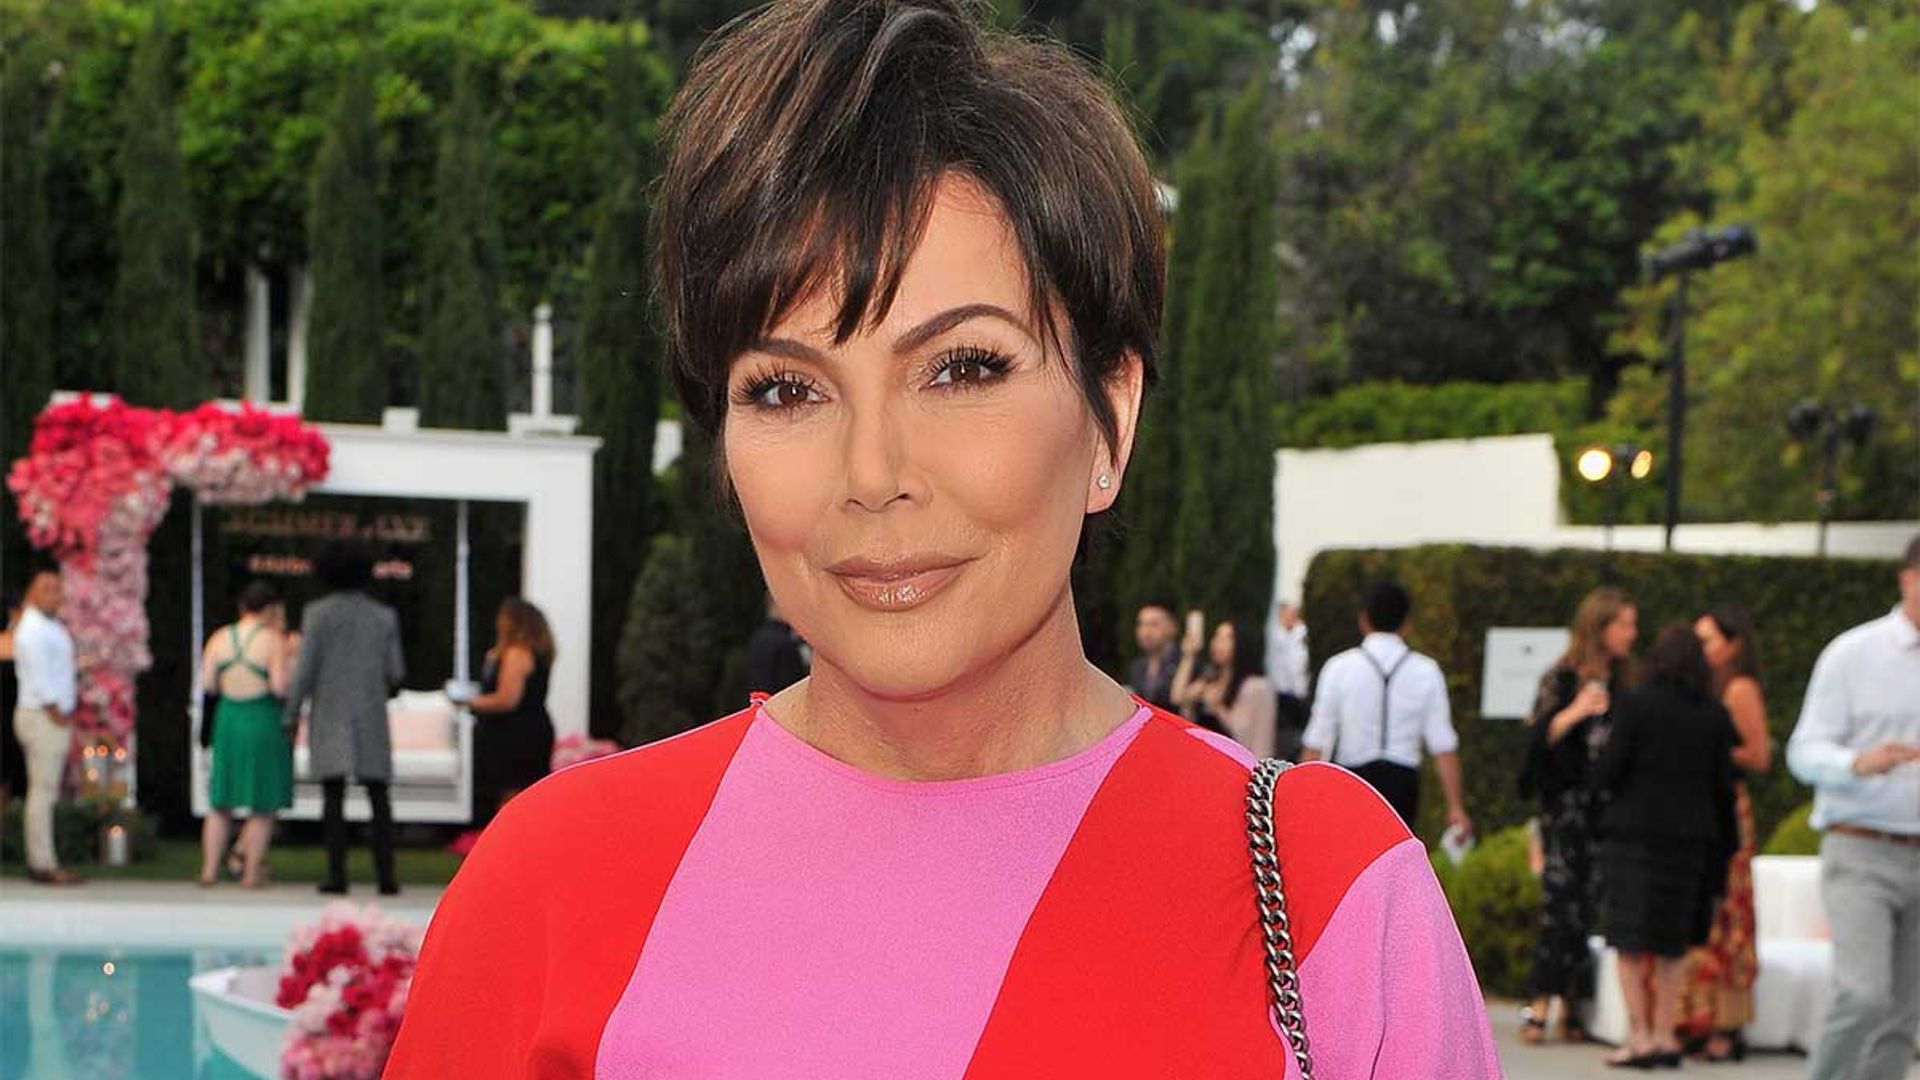 Kris Jenner Surprises With New Golden Hair Transformation Hello